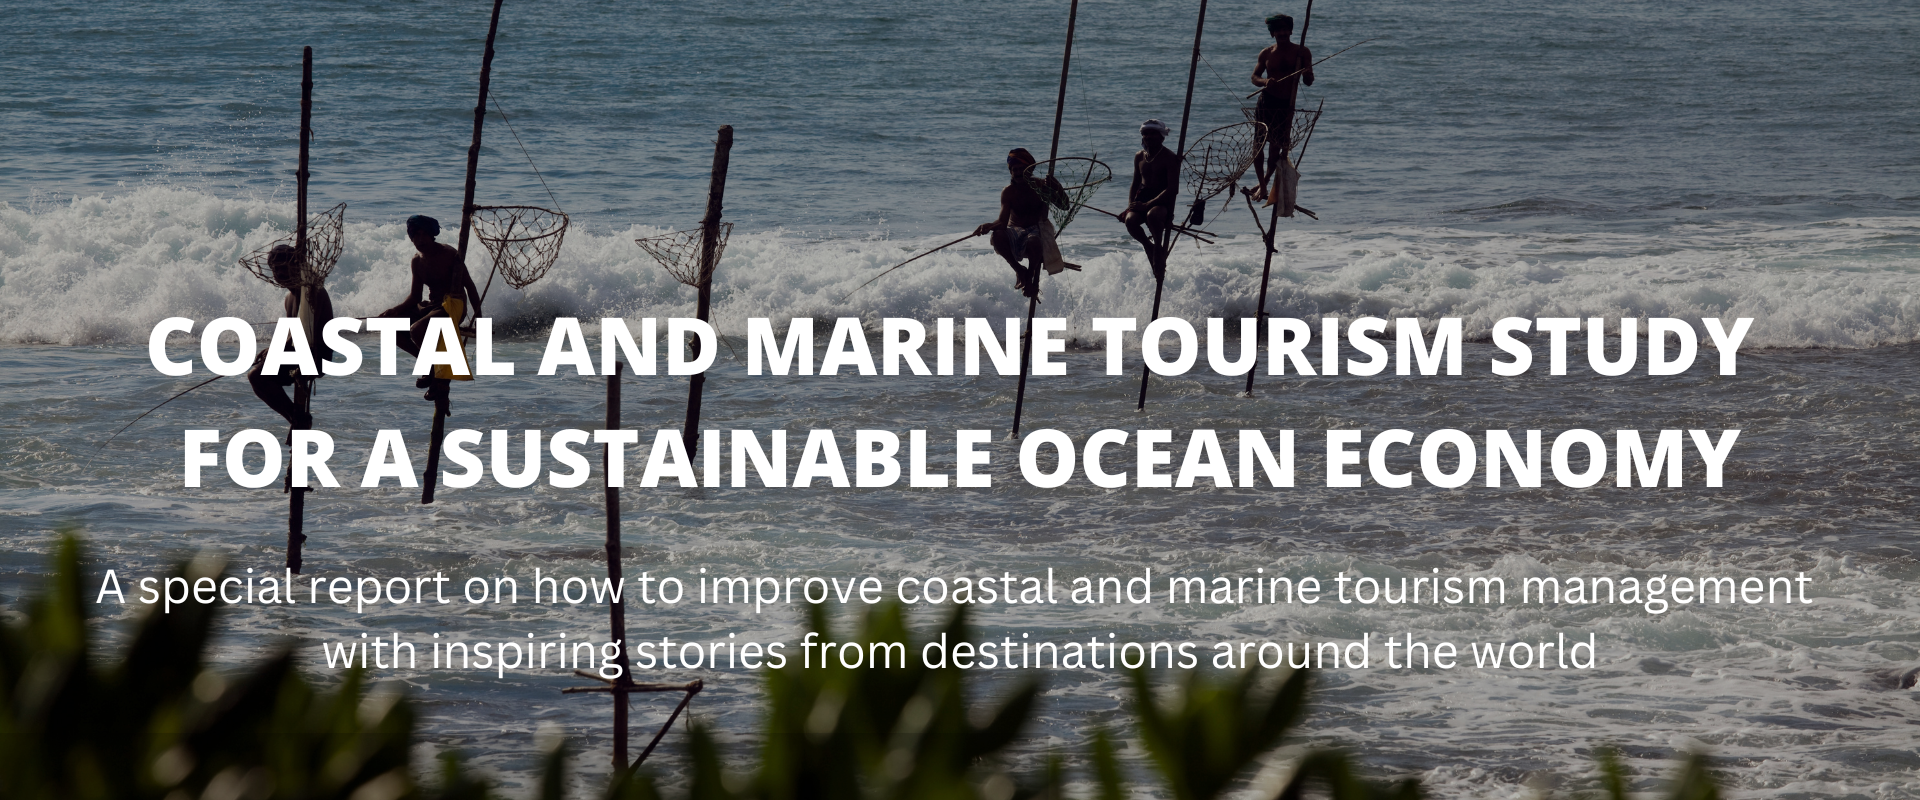 EWI Contributes to Coastal and Marine Tourism Study for a Sustainable Ocean Economy2